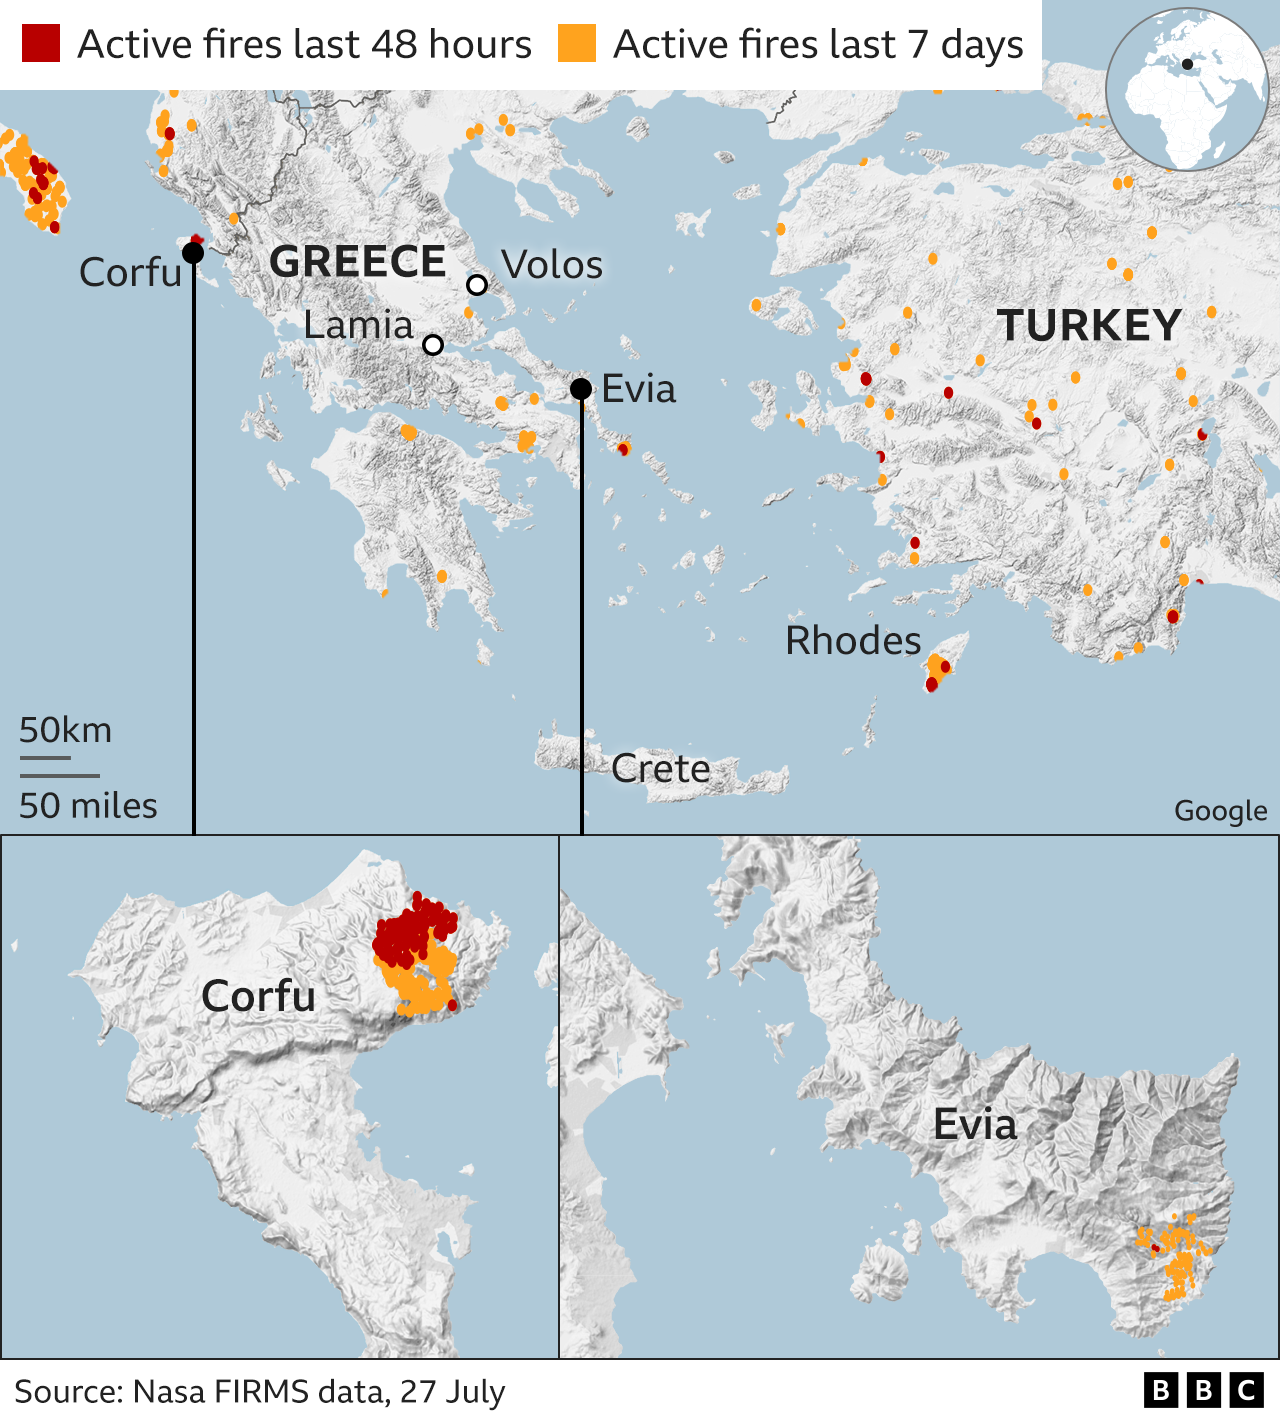 Map showing fires in mainland Greece, Corfu and Evia over last 48 hours and last seven days